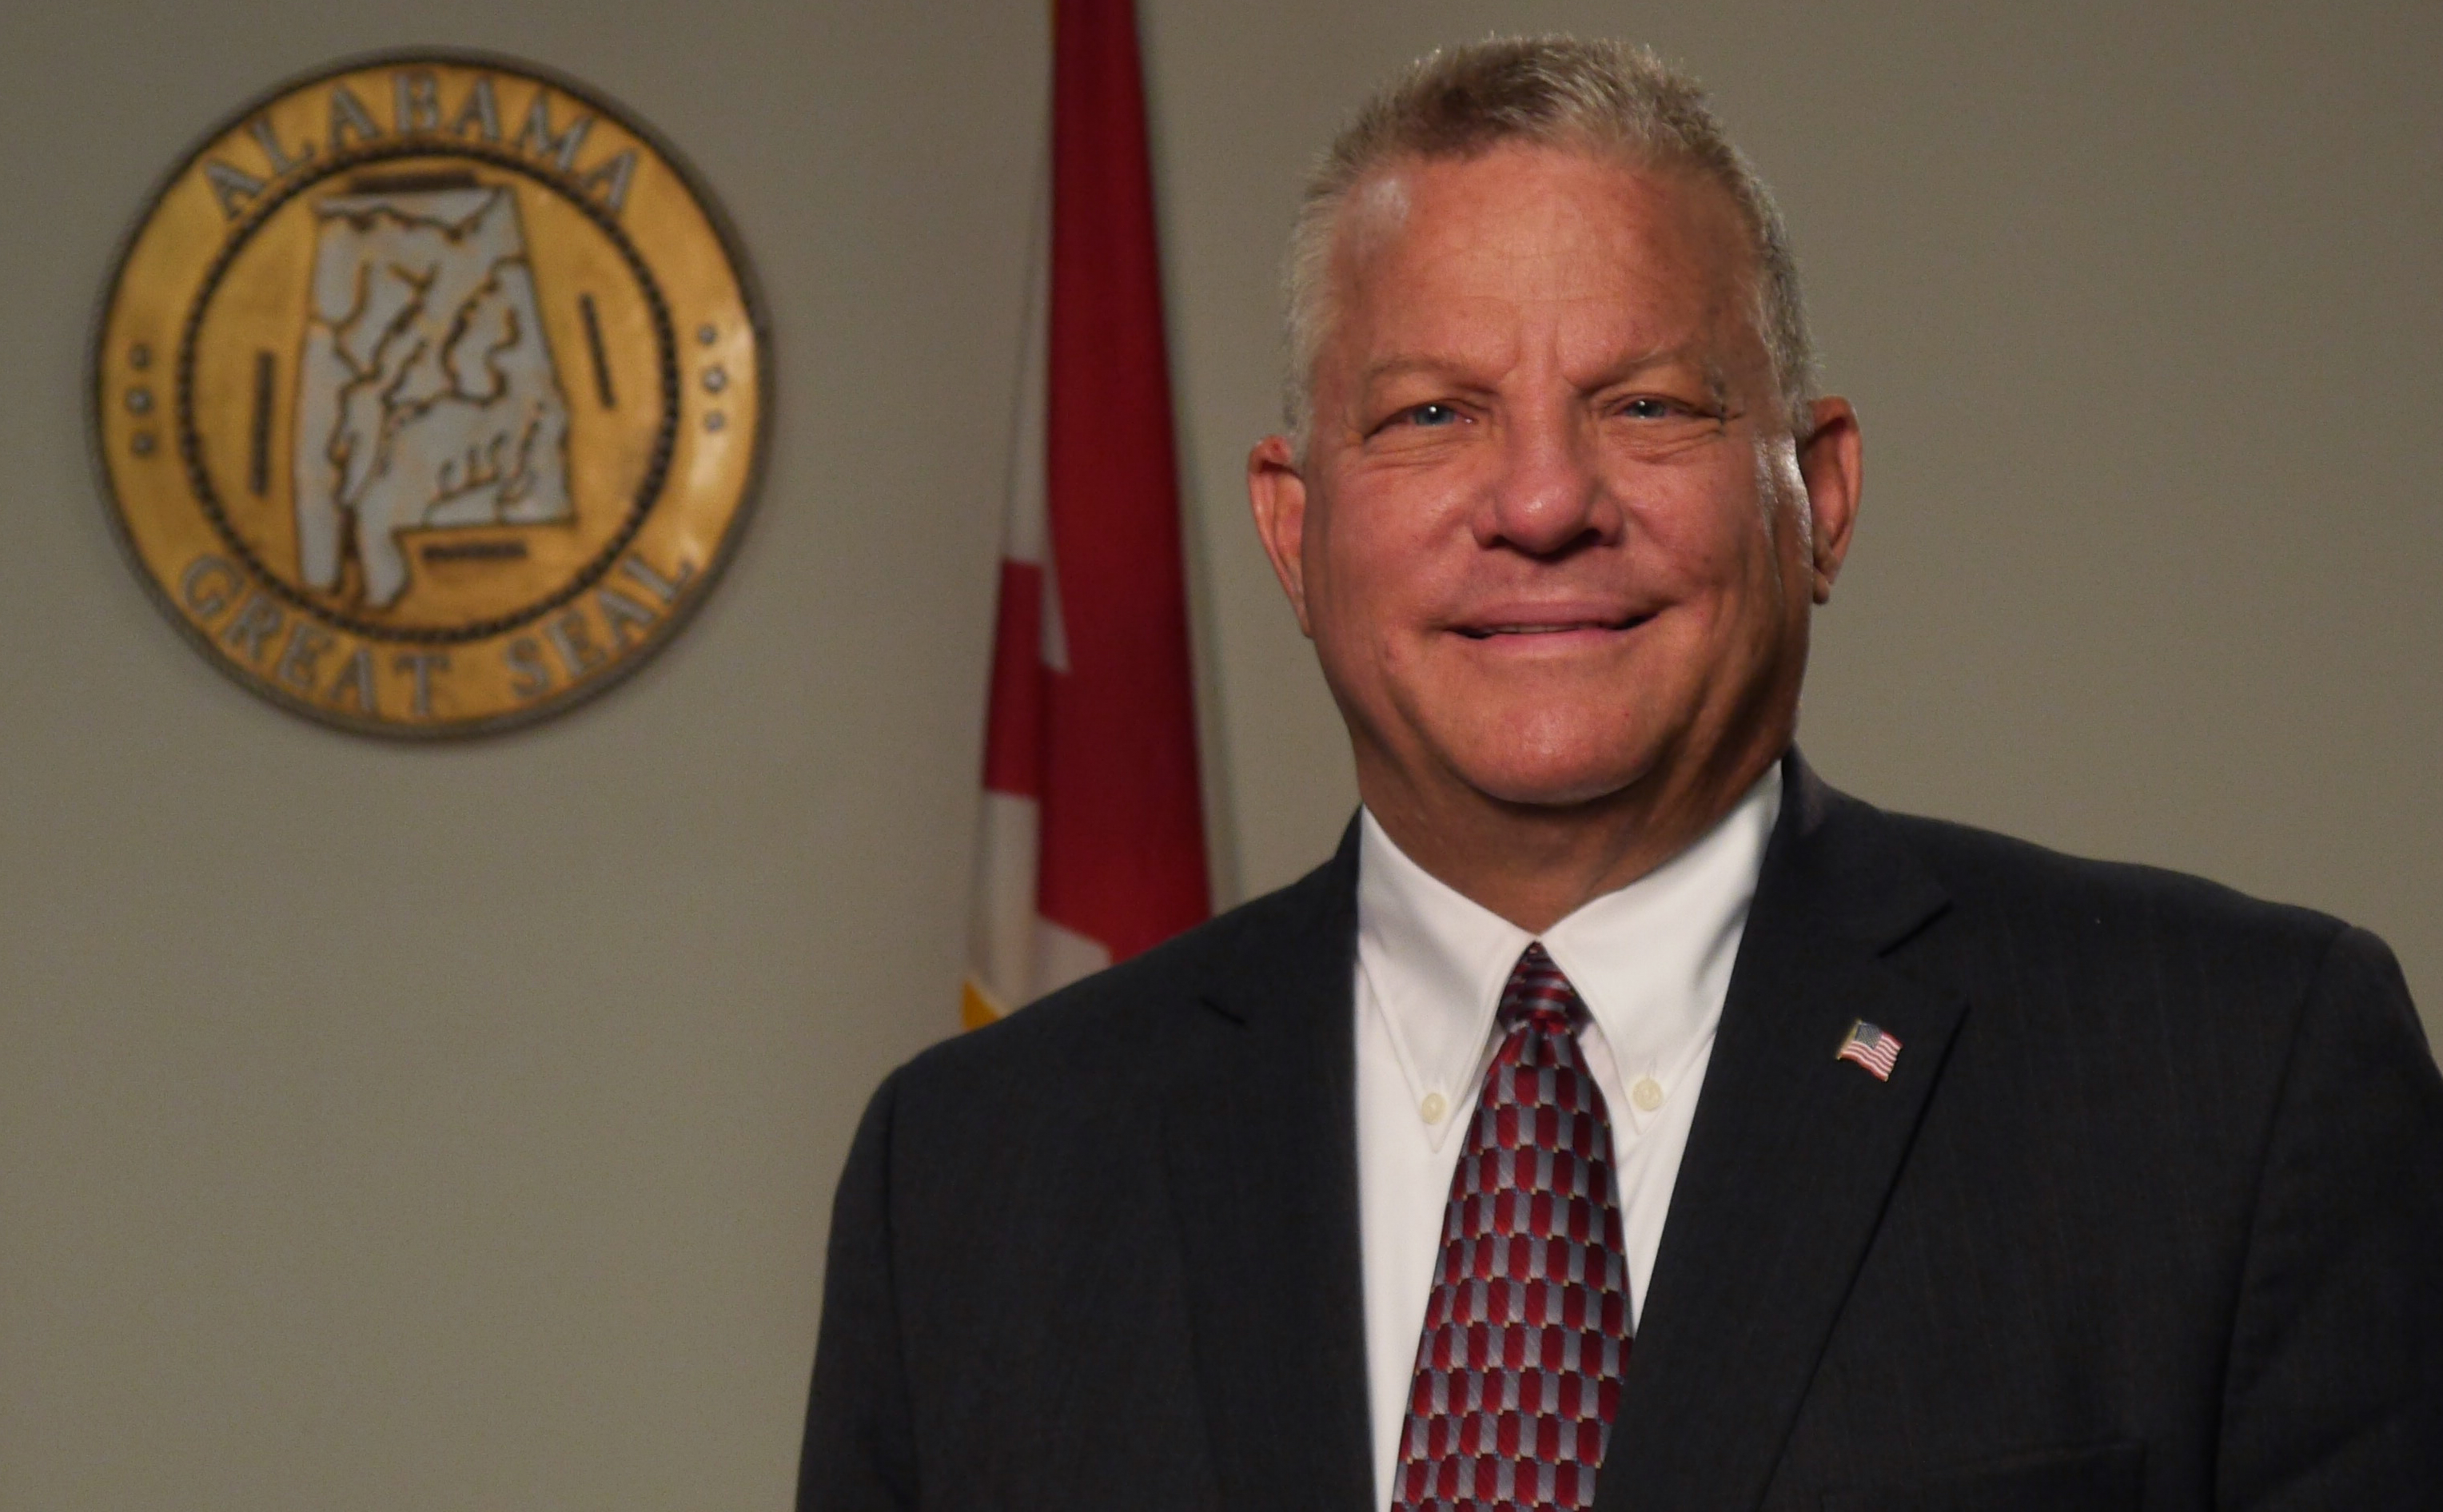 Alabama Republican Assembly endorses Mike Anderton for Jefferson County District Attorney